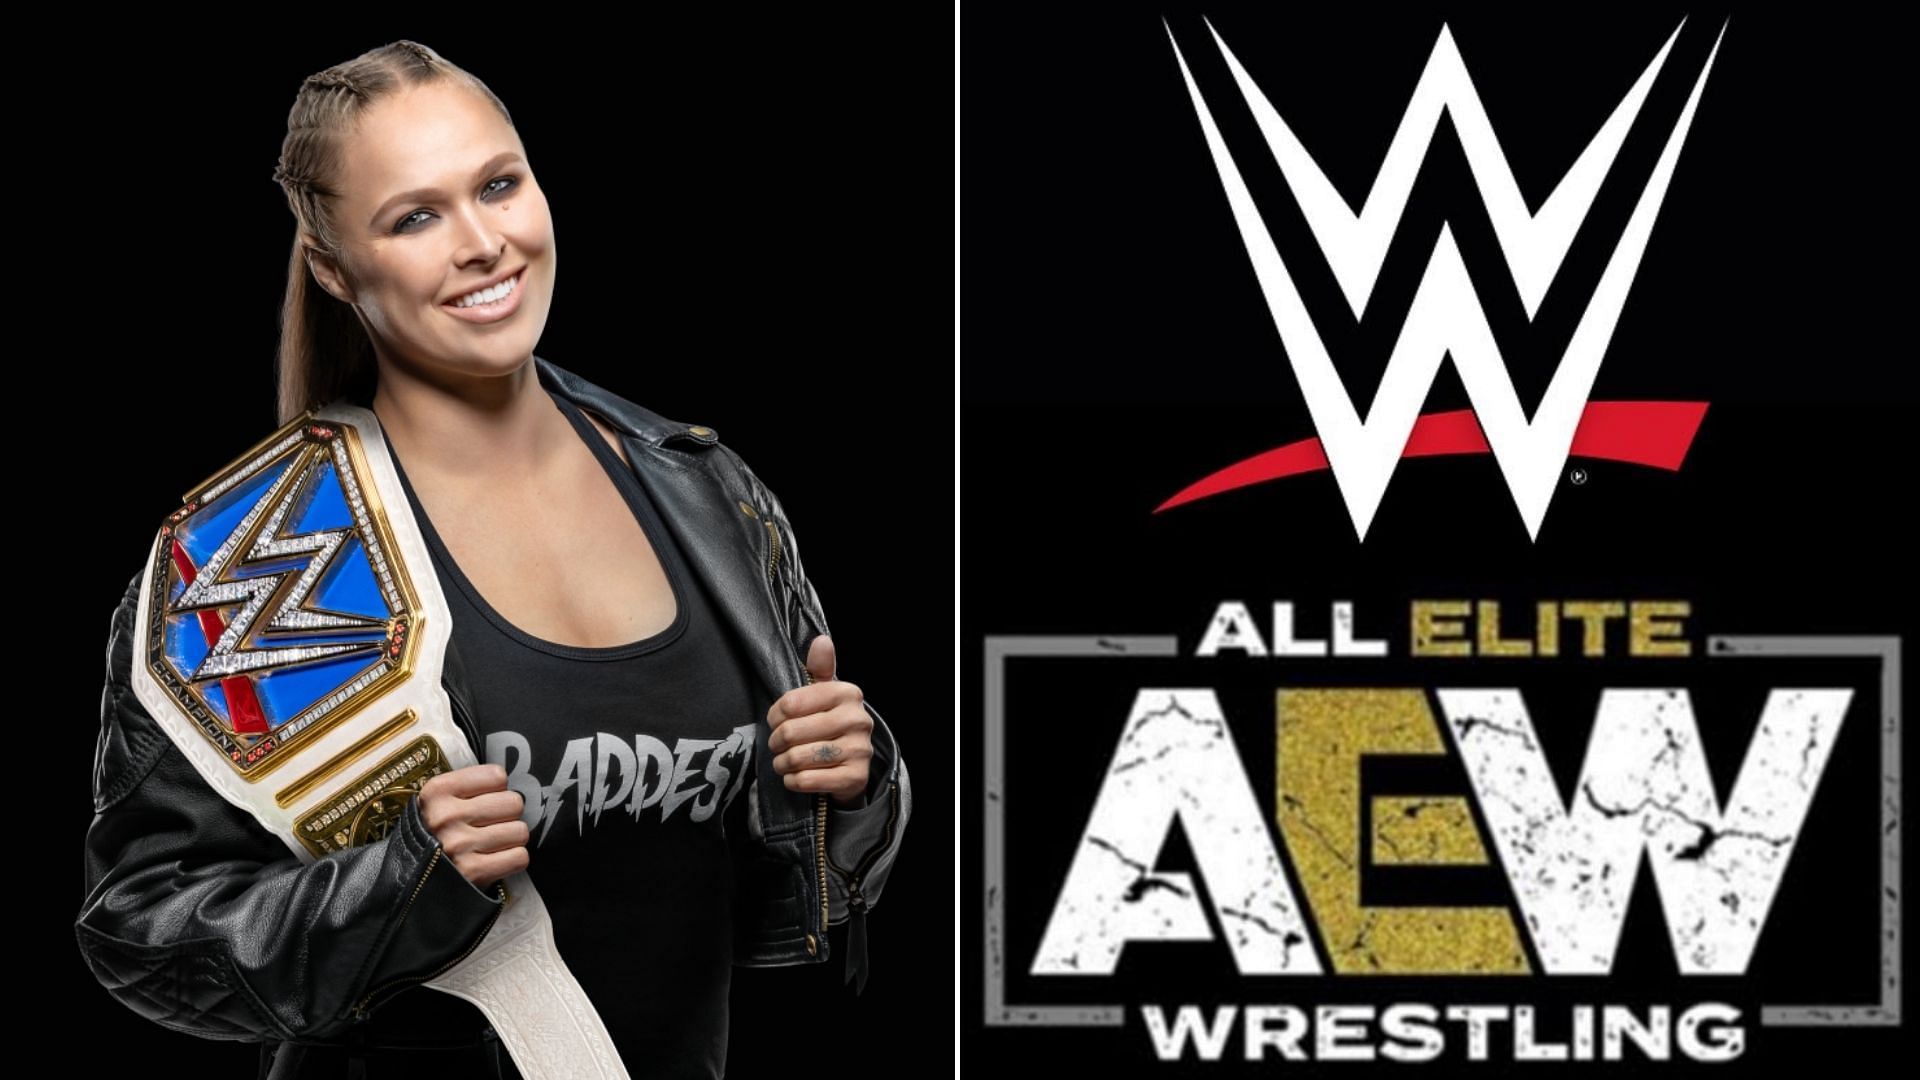 WWE wrestler Ronda Rousey was recently compared to an AEW star